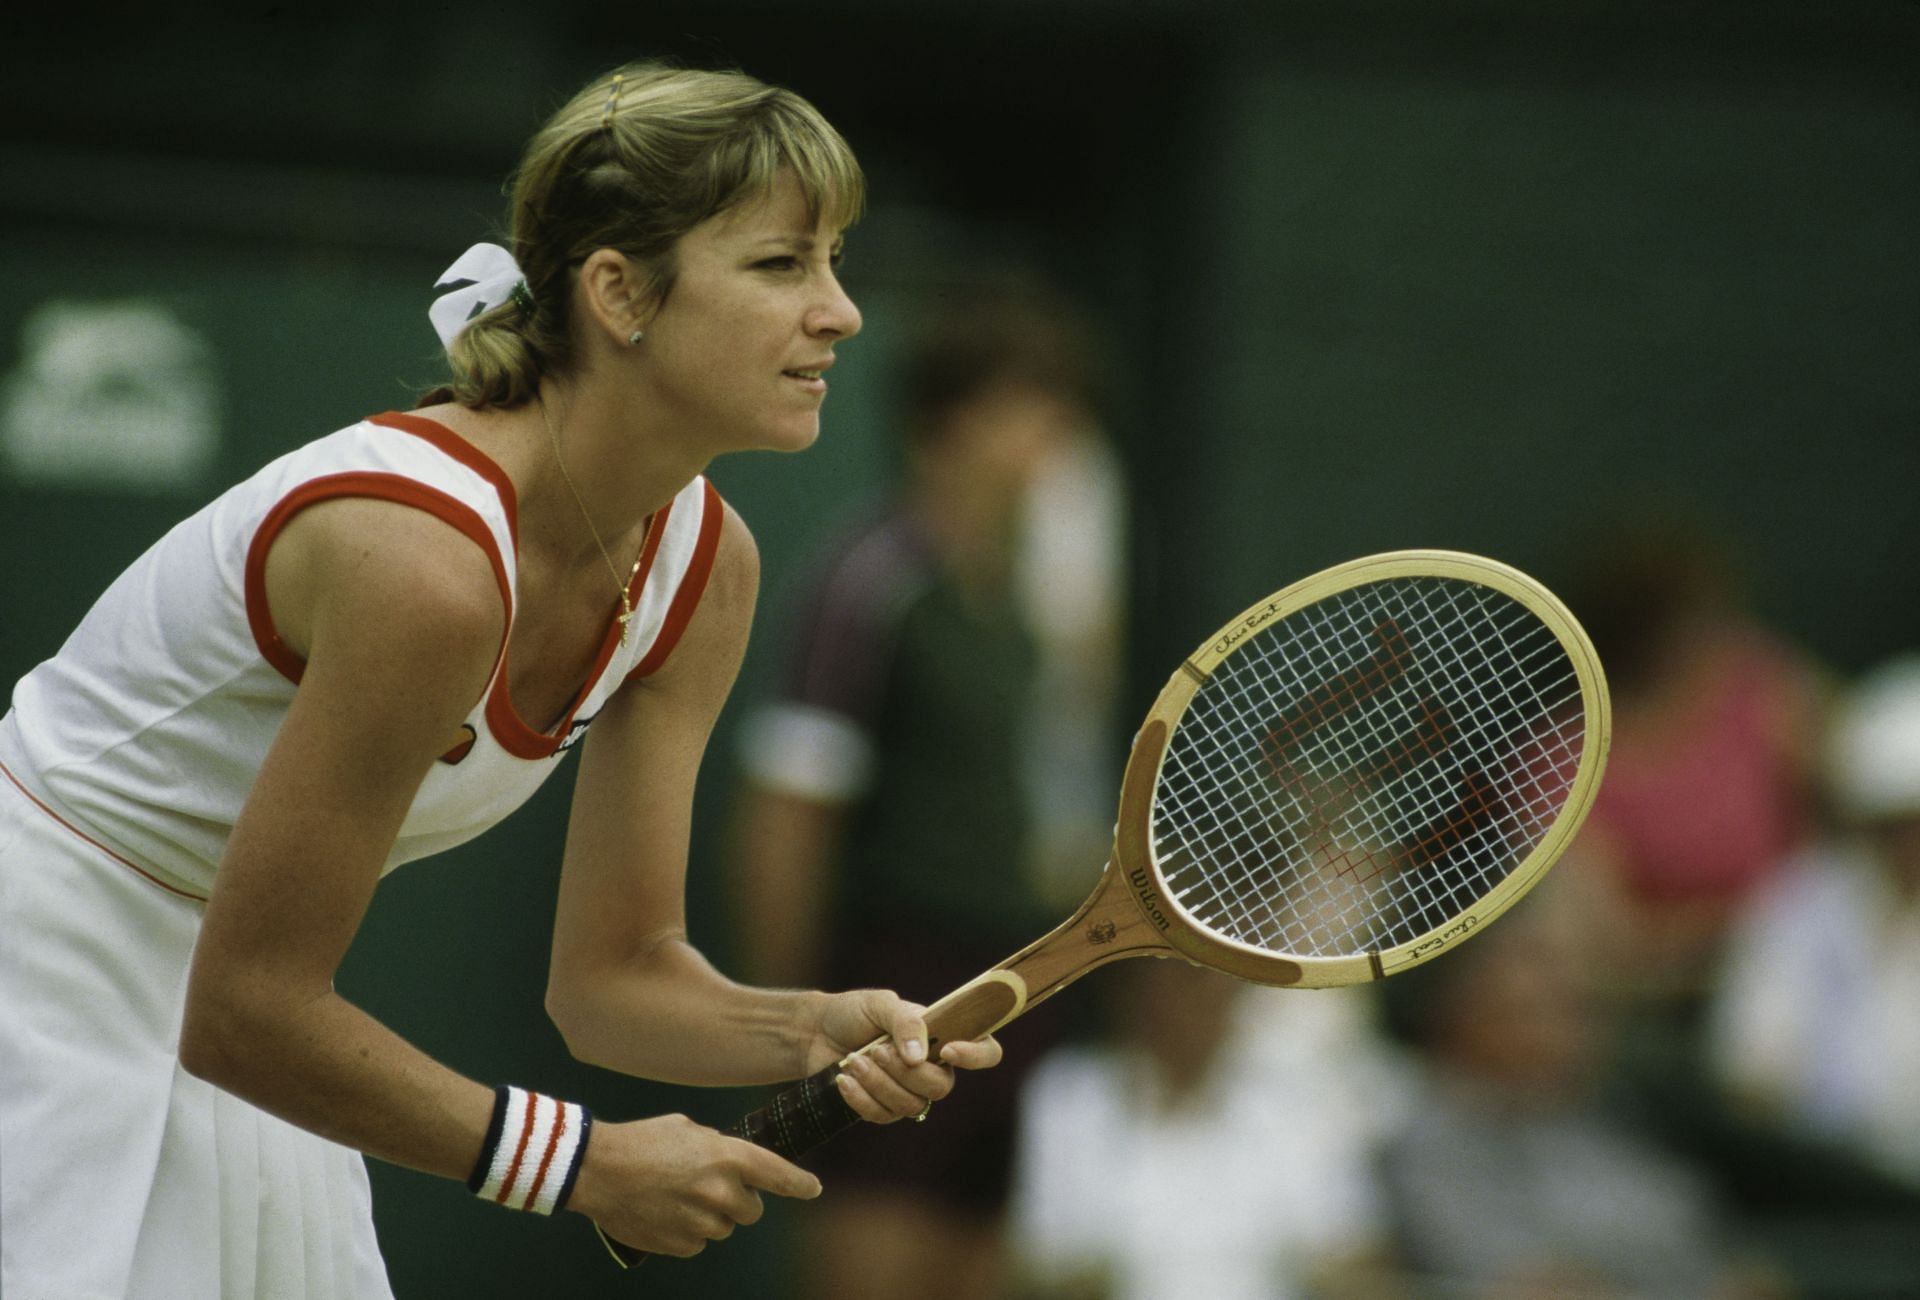 Chris Evert in action at the 1982 Wimbledon Championships in London.